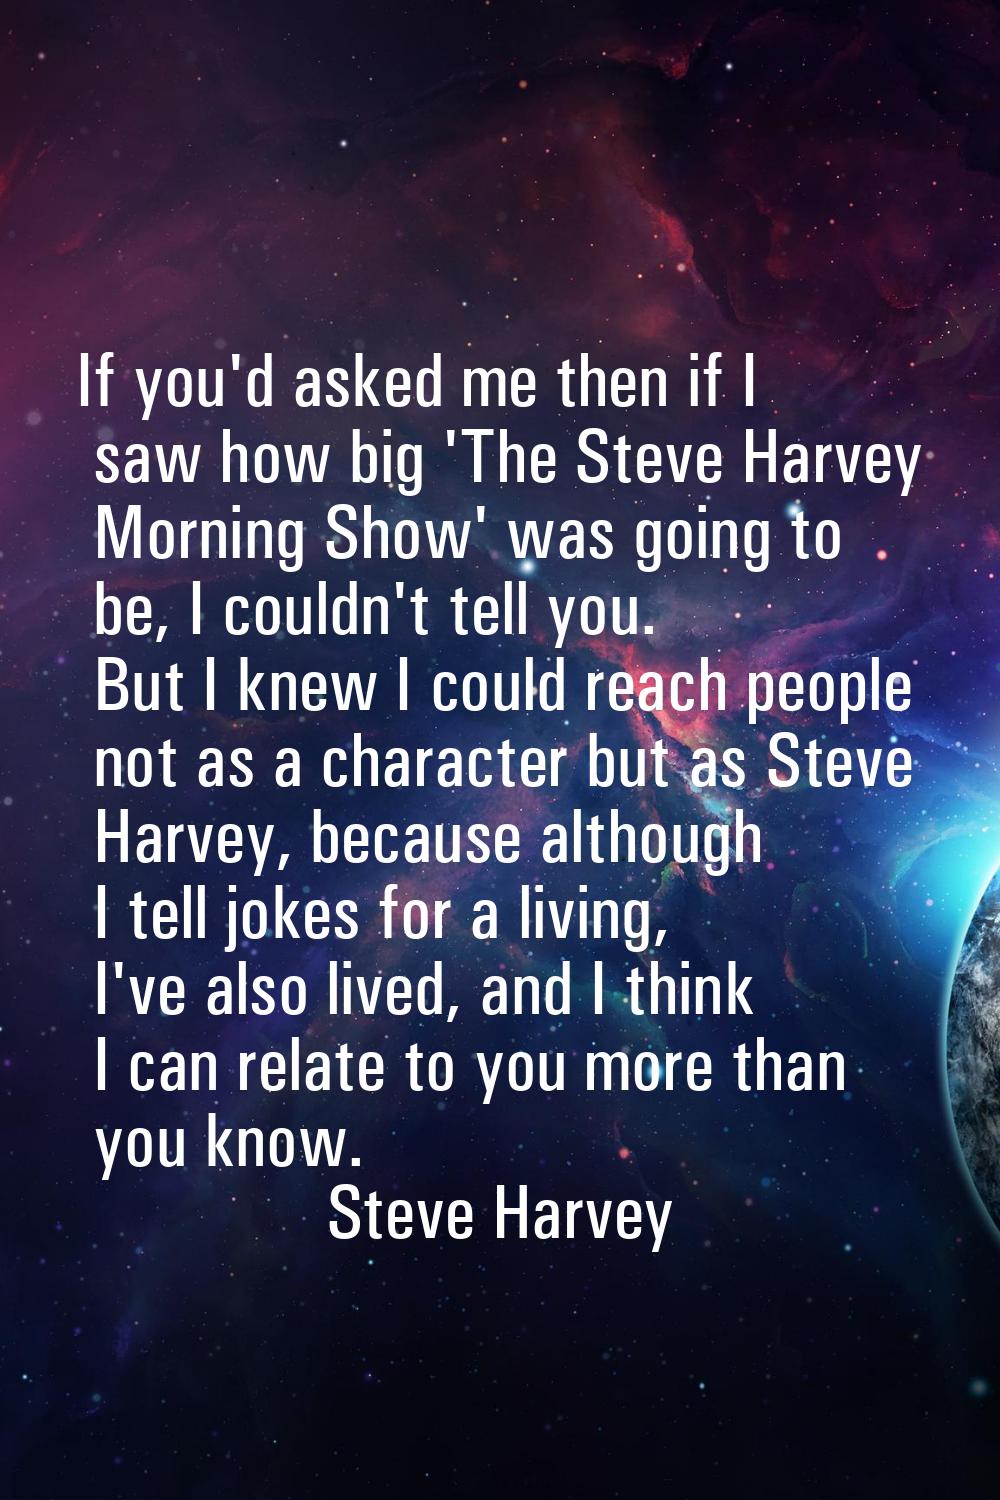 If you'd asked me then if I saw how big 'The Steve Harvey Morning Show' was going to be, I couldn't